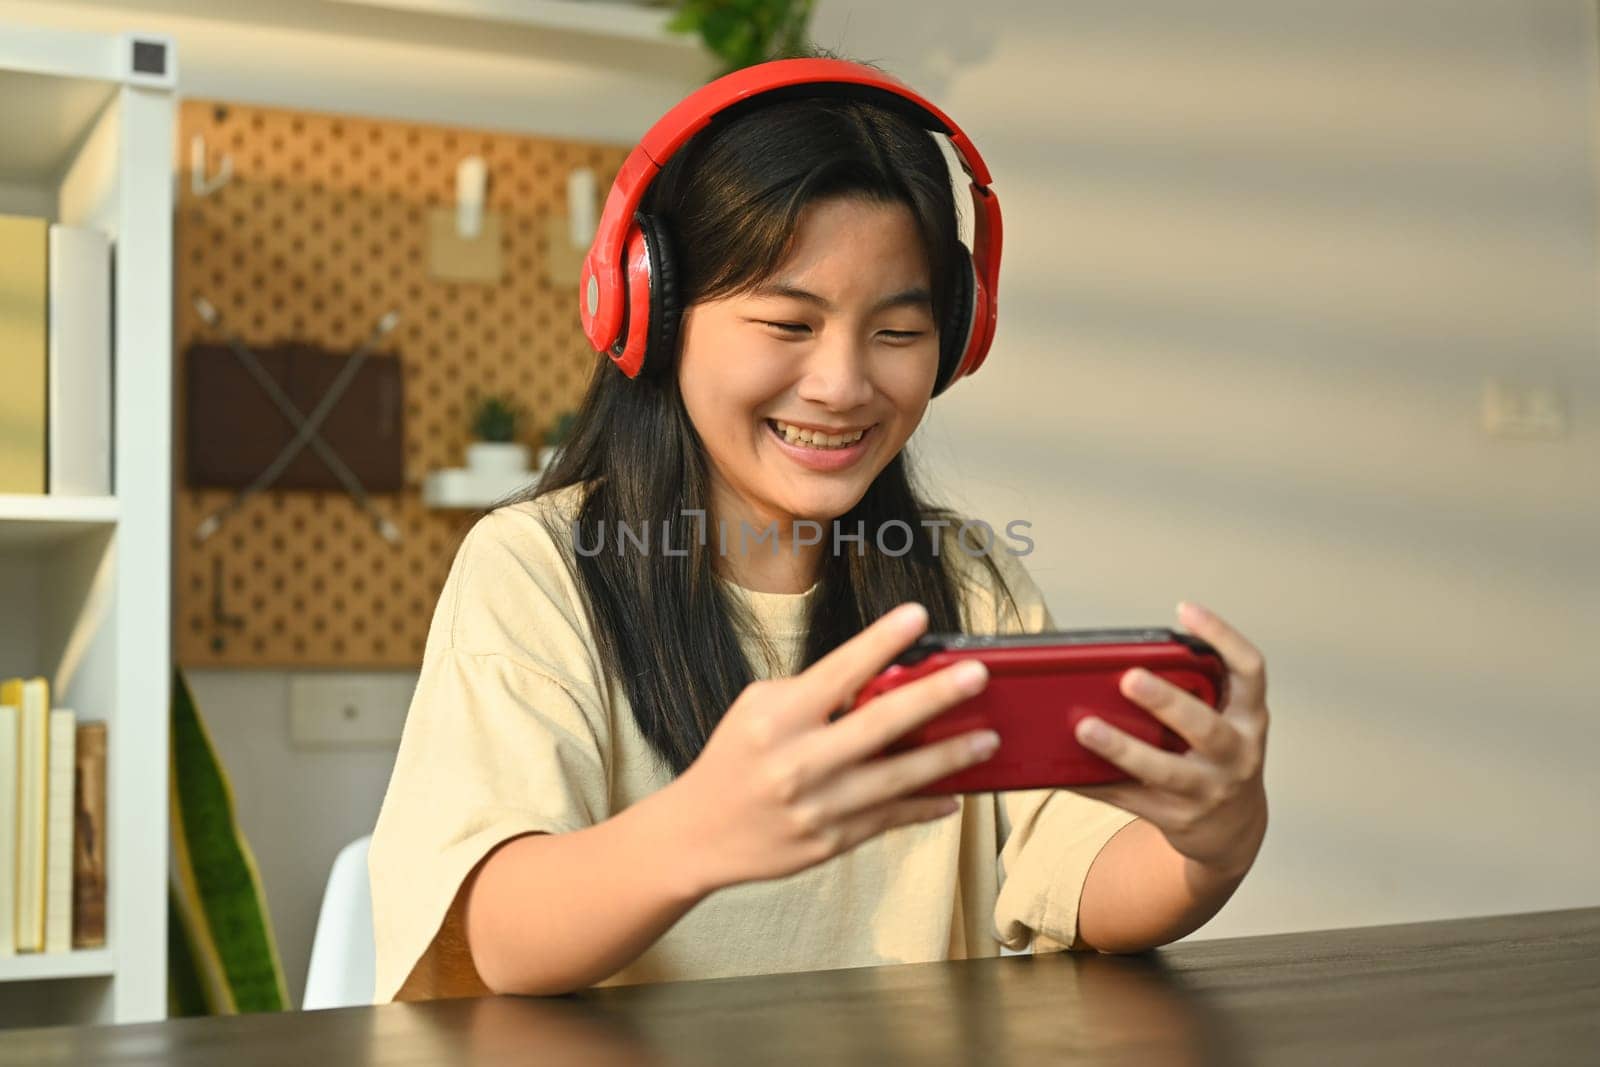 Joyful teenage asian girl playing video game on a portable game console at home. Leisure, entertainment and technology.